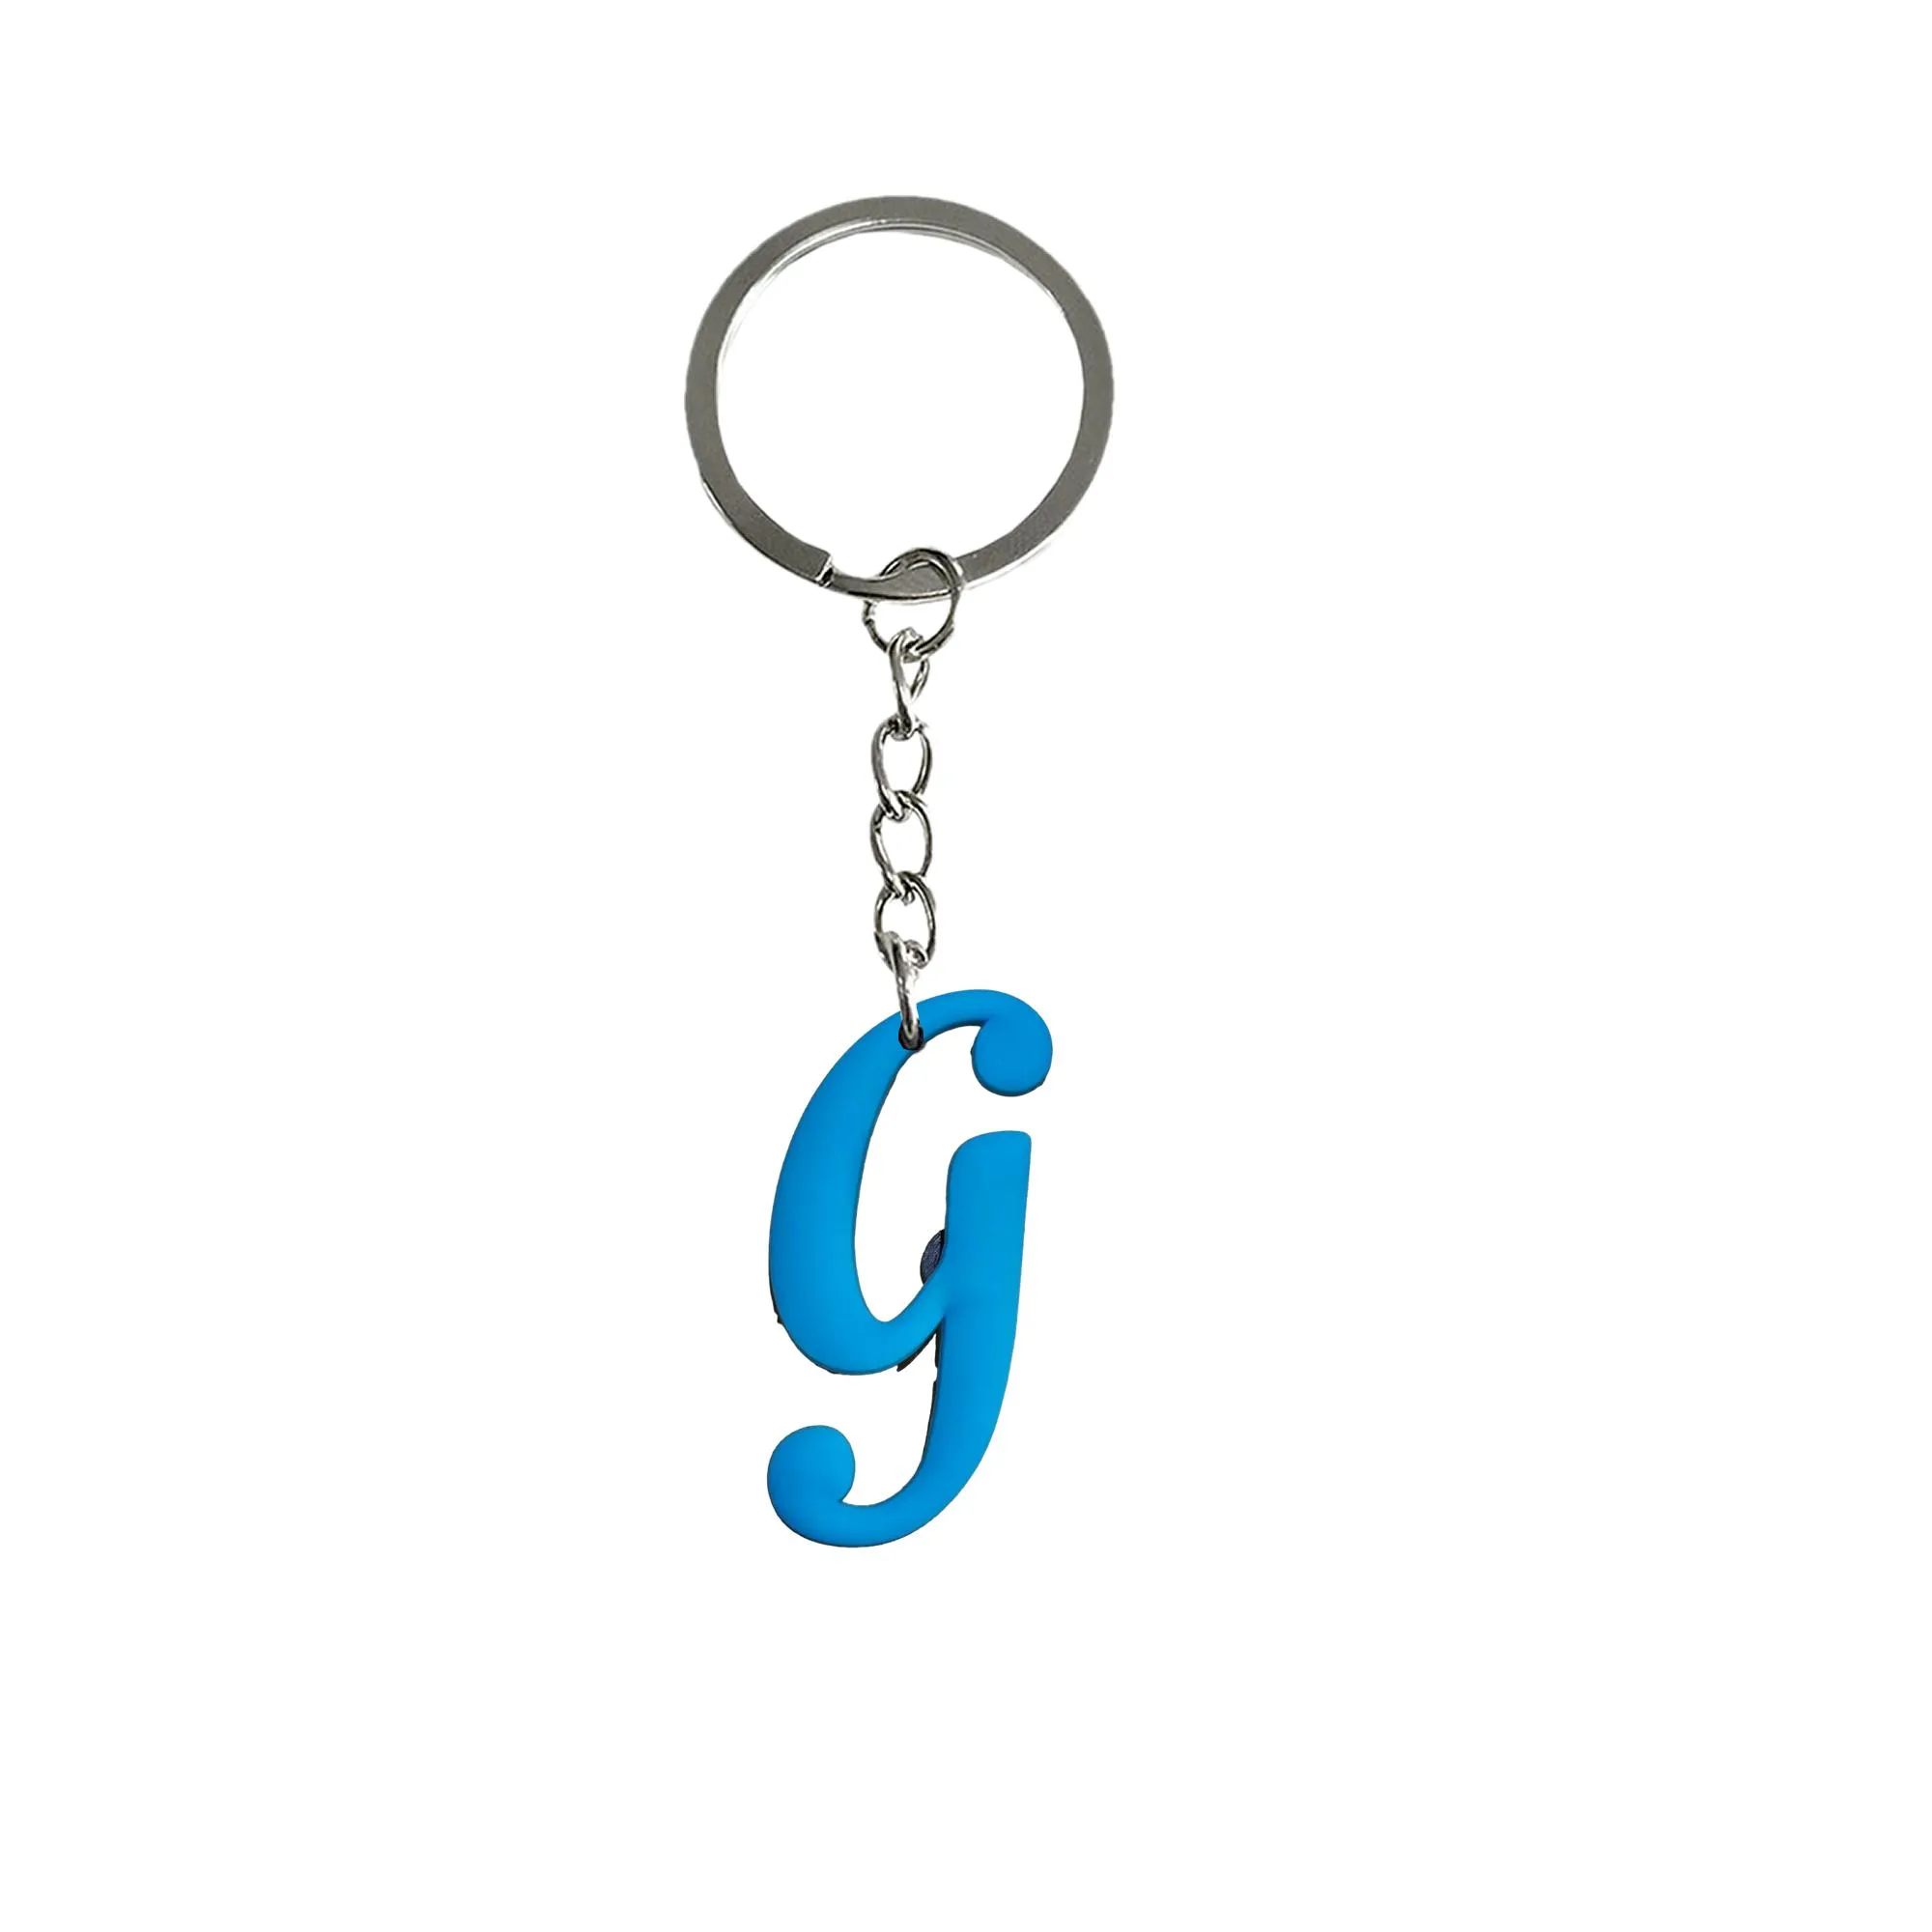 blue large letters keychain keychains for backpack kids party favors keyring suitable schoolbag women key ring girls pendant accessories bags